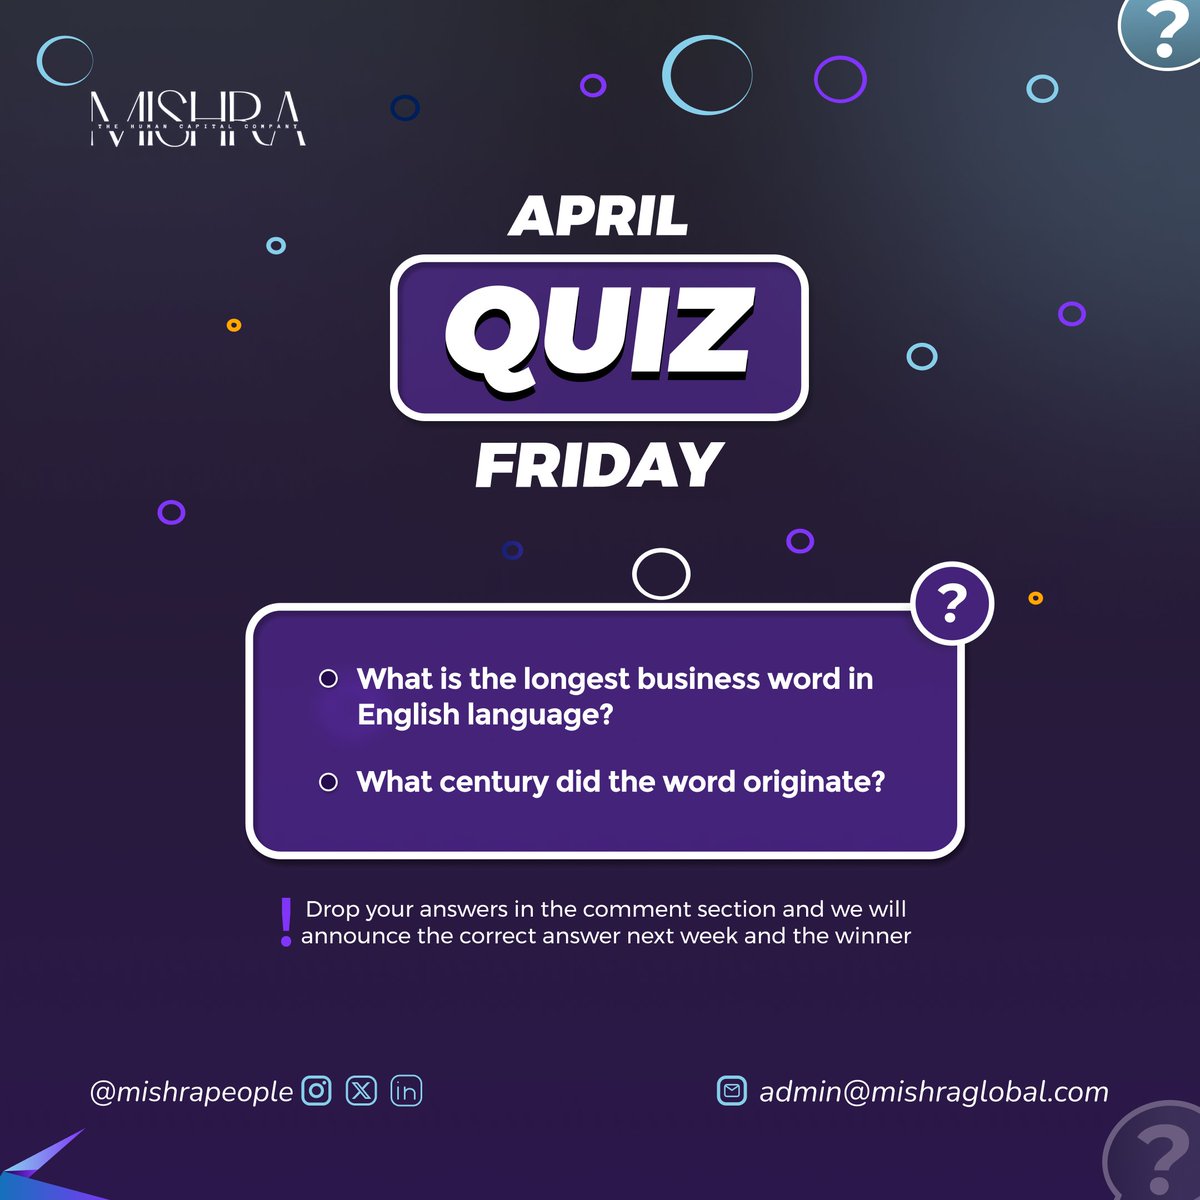 It's Fri-yay! Test your brain with our fun quiz

A surprise token may come your way, check you are following our page too.

#mishrapeople #tgif #friday #quiz #businessdevelopment #HRManagement #riskmanagement #personaldevelopment #businessmanagement #AbujaTwitterCommunity